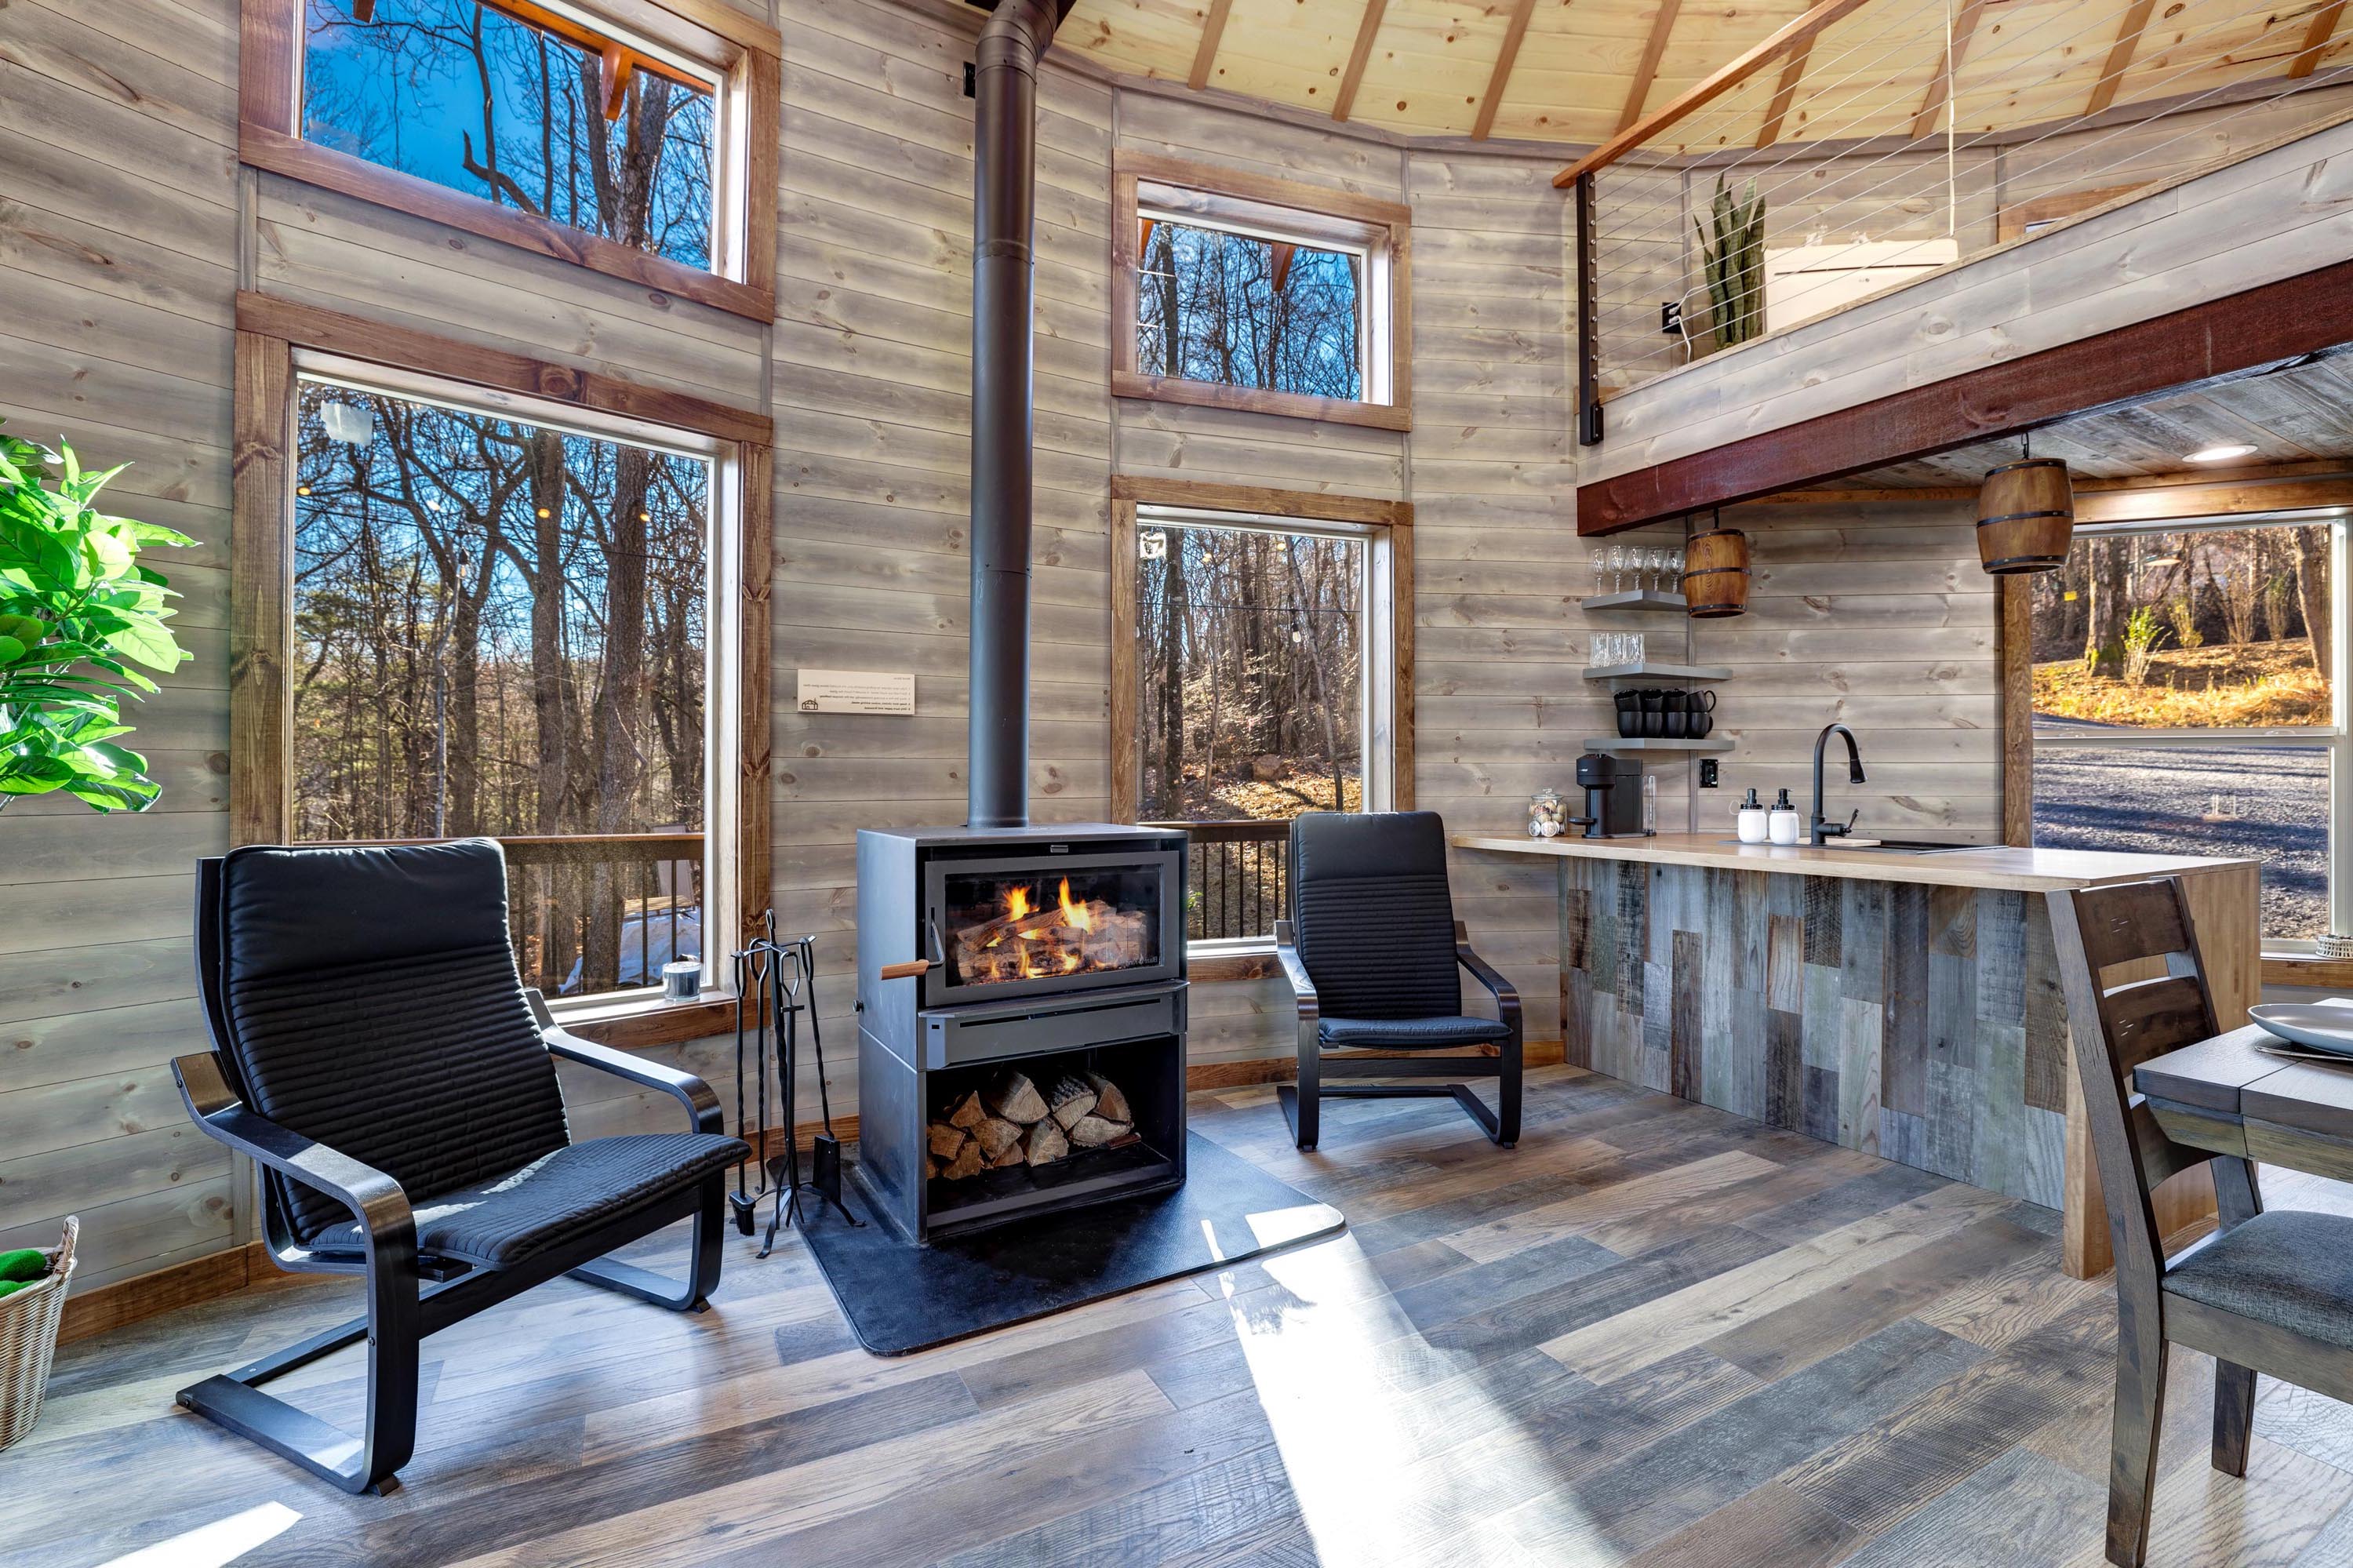 <span  class="uc_style_uc_tiles_grid_image_elementor_uc_items_attribute_title" style="color:#ffffff;">Two rocking chairs and a wood stove</span>